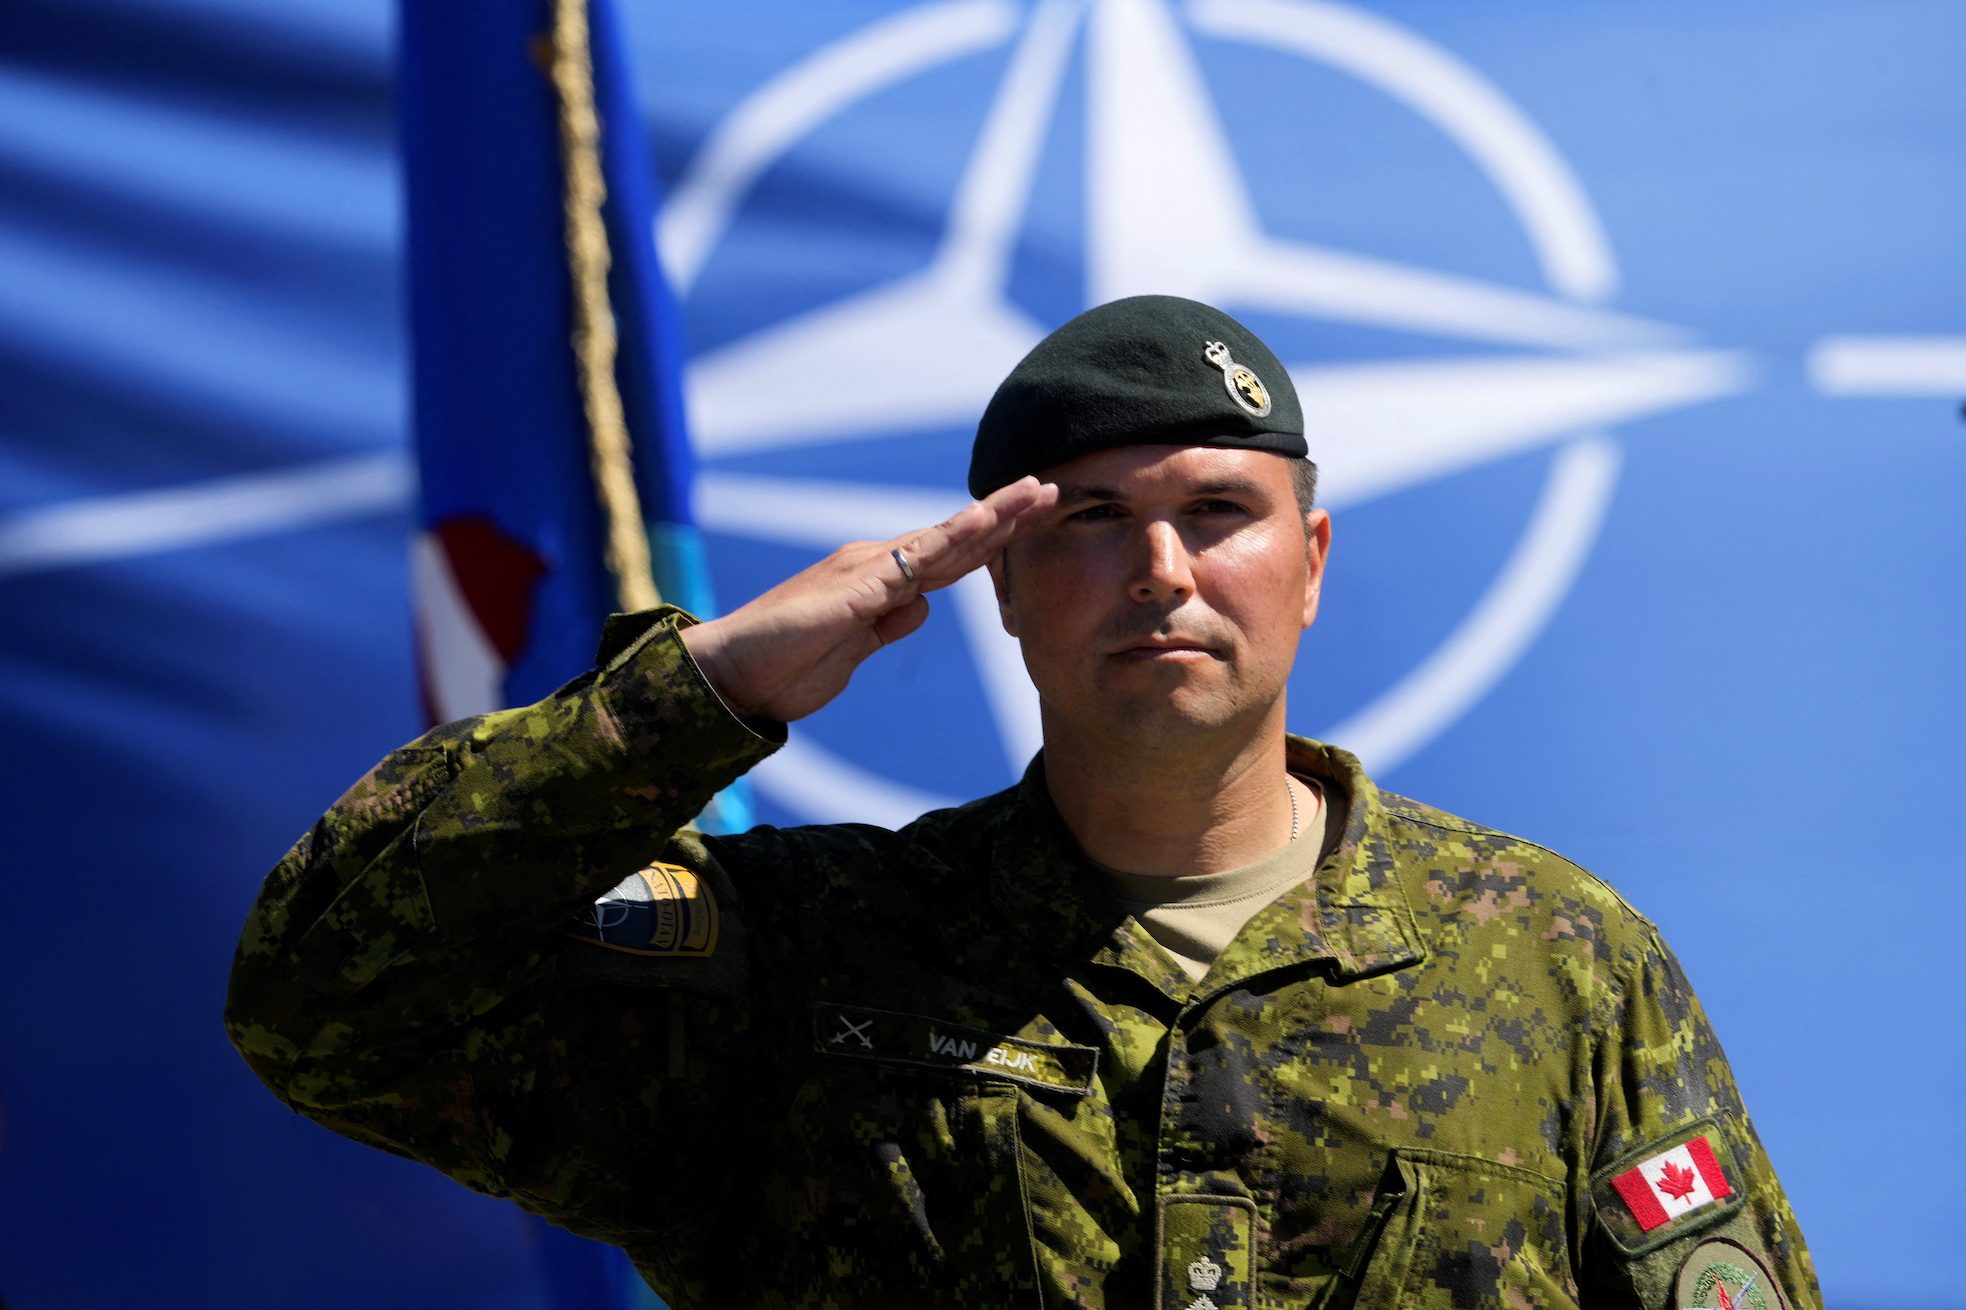 Latvia wants more NATO troops, fed up of ‘paying for lunch for the others’